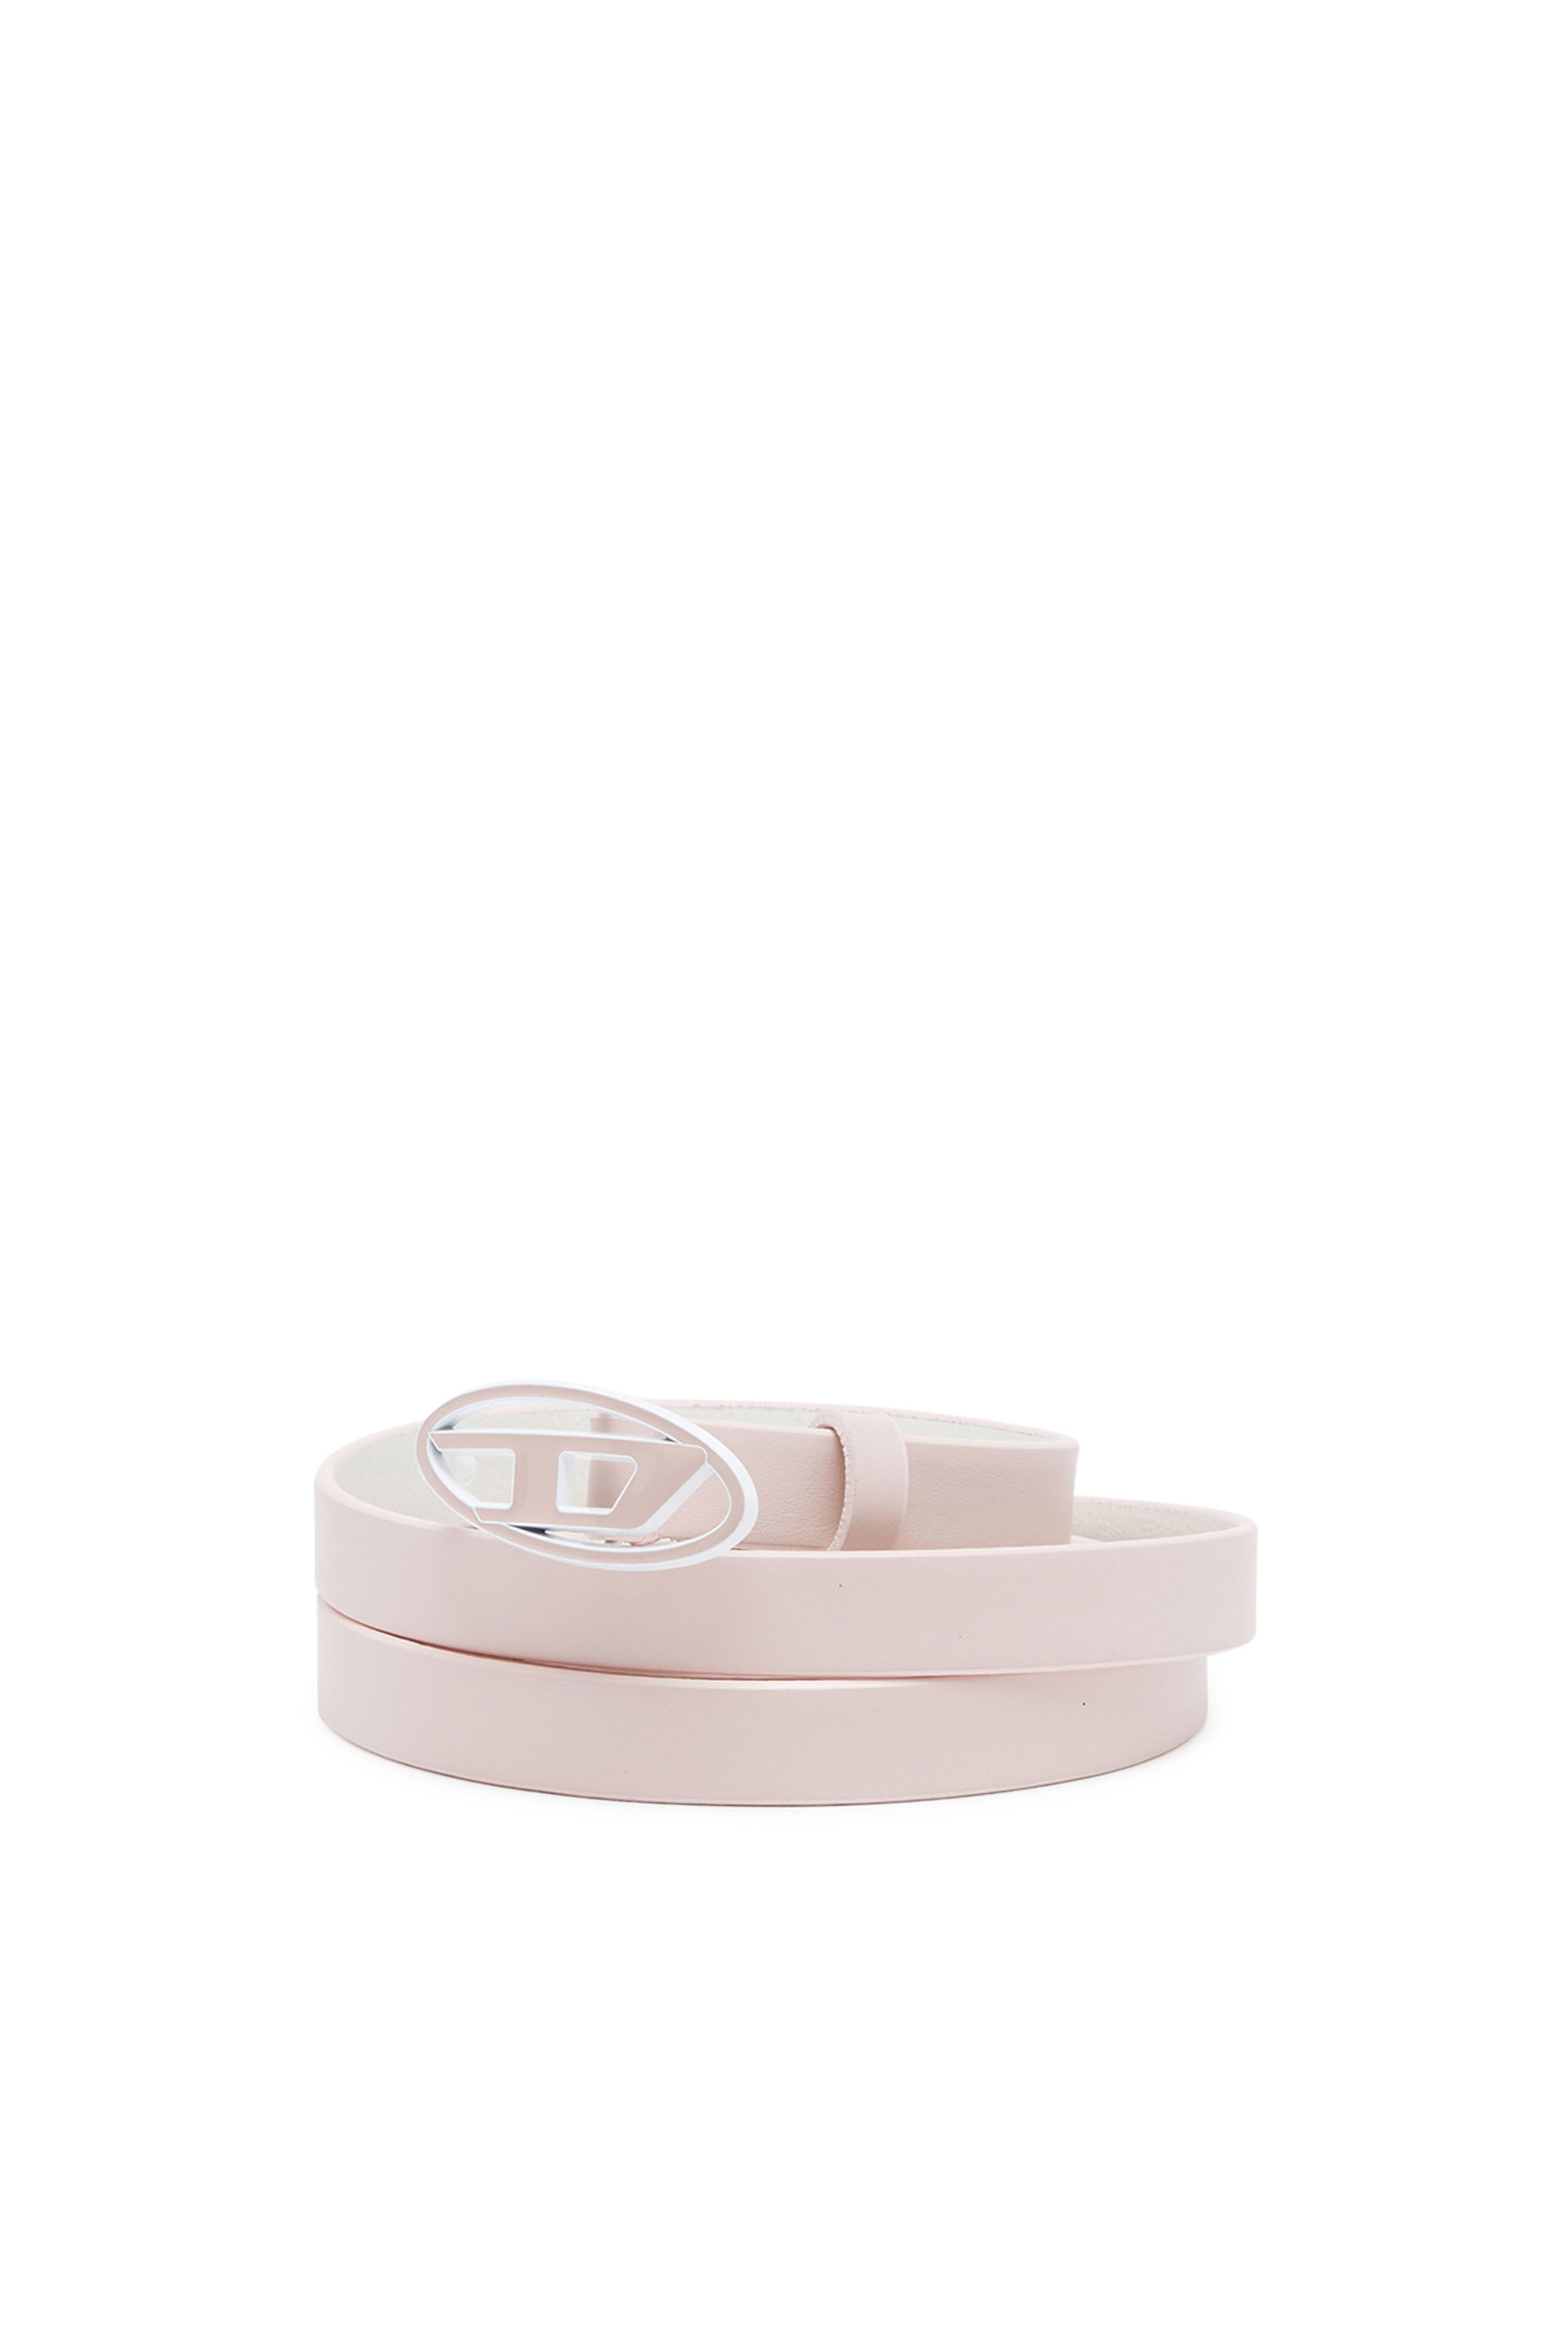 B-1DR 15 DOUBLE Pastel leather double-wrap belt｜ピンク ...